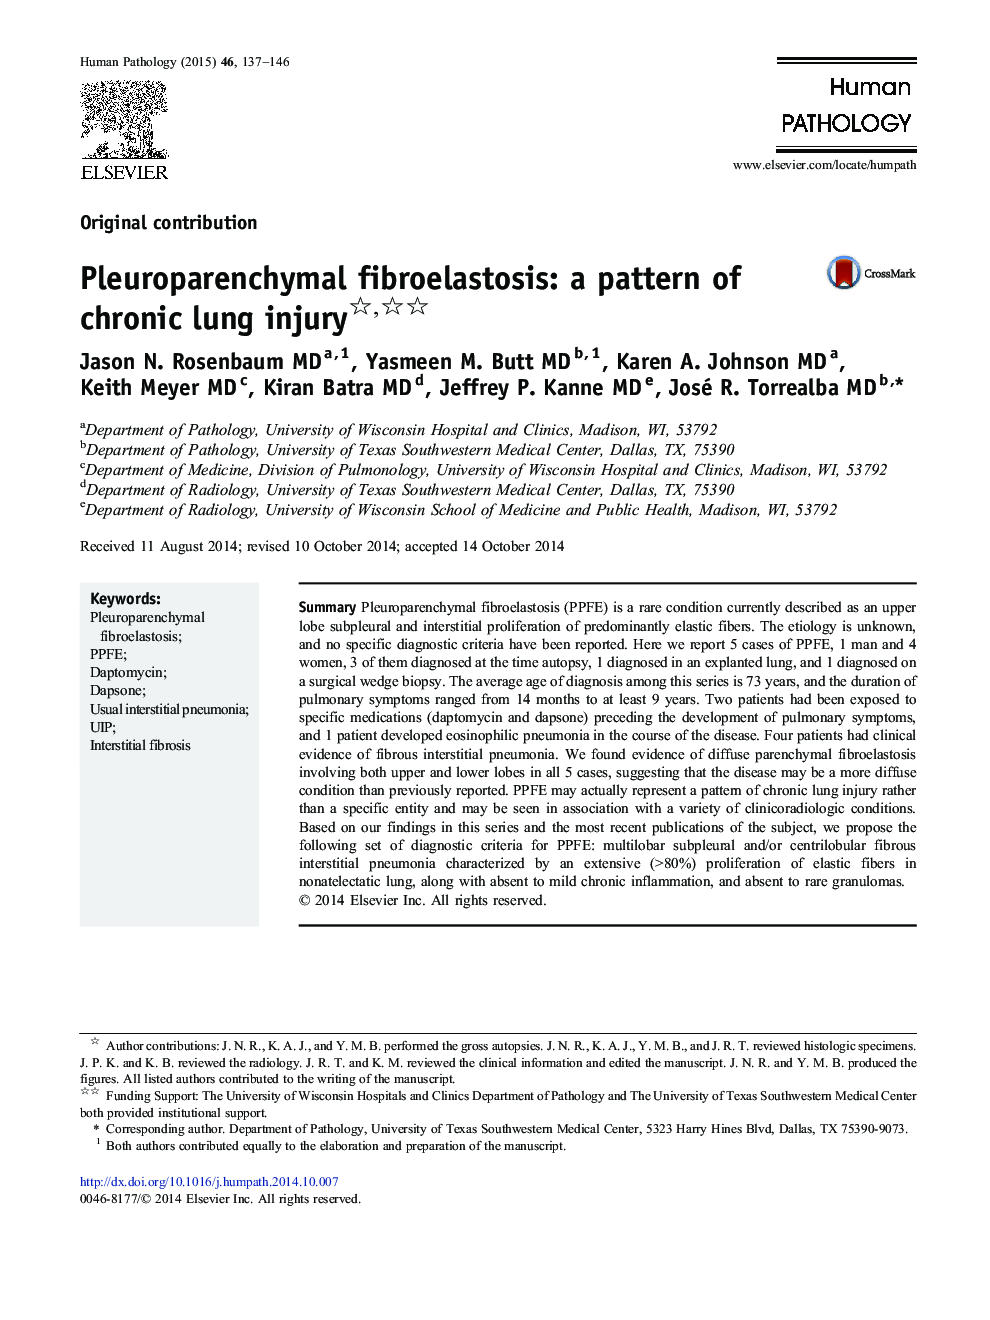 Pleuroparenchymal fibroelastosis: a pattern of chronic lung injury